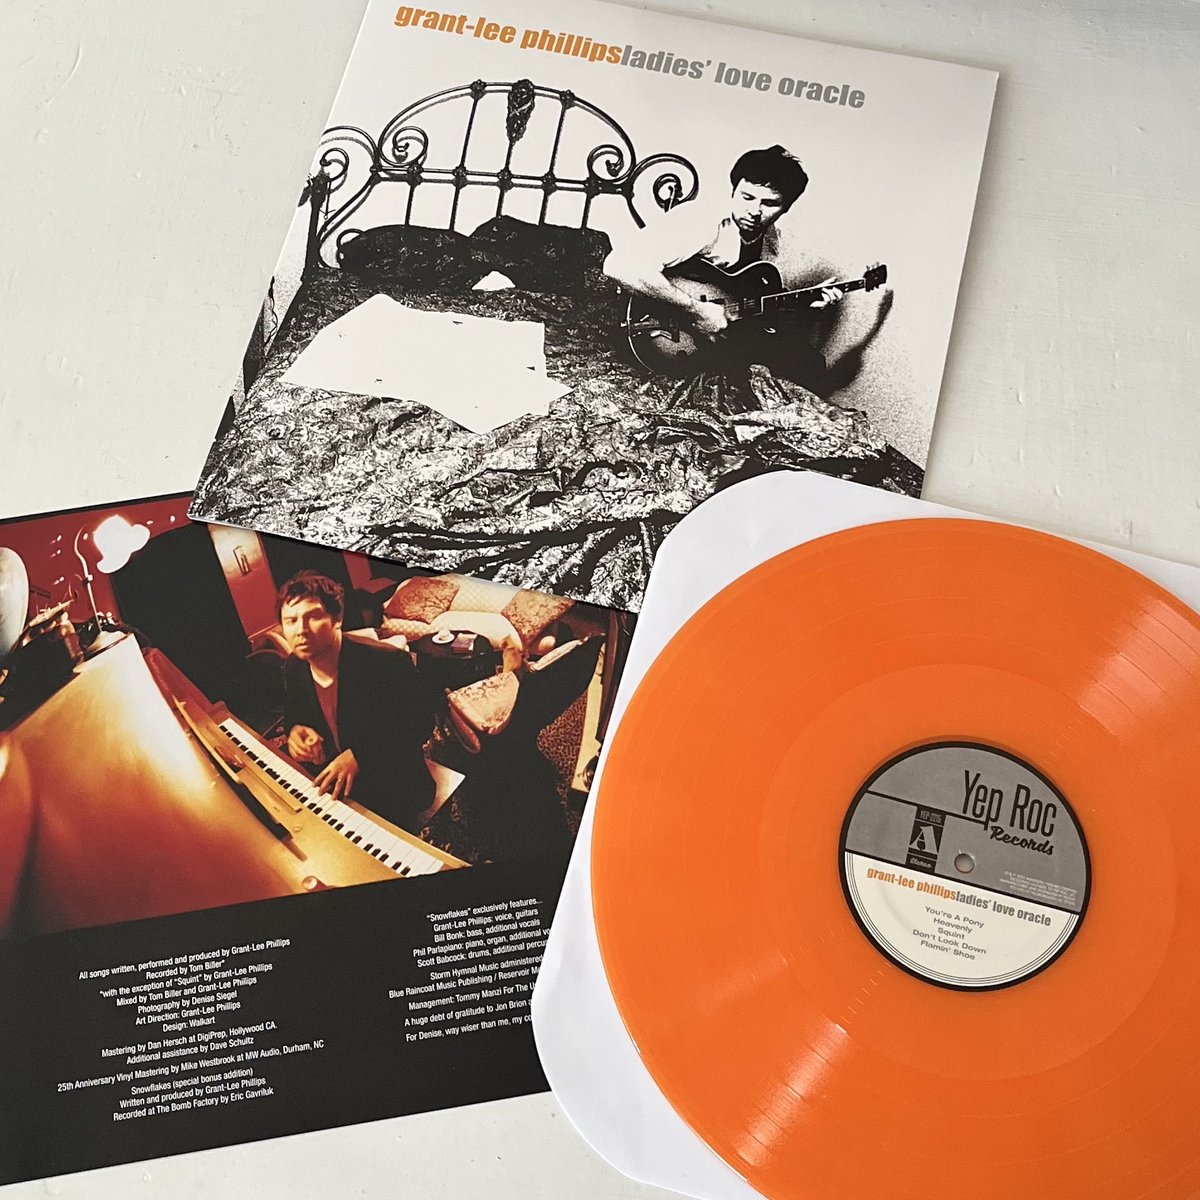 The 25th Anniversary Edition of @GrantLeeTweets's 𝘓𝘢𝘥𝘪𝘦𝘴’ 𝘓𝘰𝘷𝘦 𝘖𝘳𝘢𝘤𝘭𝘦 is out now! 🧡The record is reissued on translucent orange color vinyl (the first time it’s ever been available on vinyl!). Only a few copies remain! Order Here: ffm.to/ladiesloveorac…